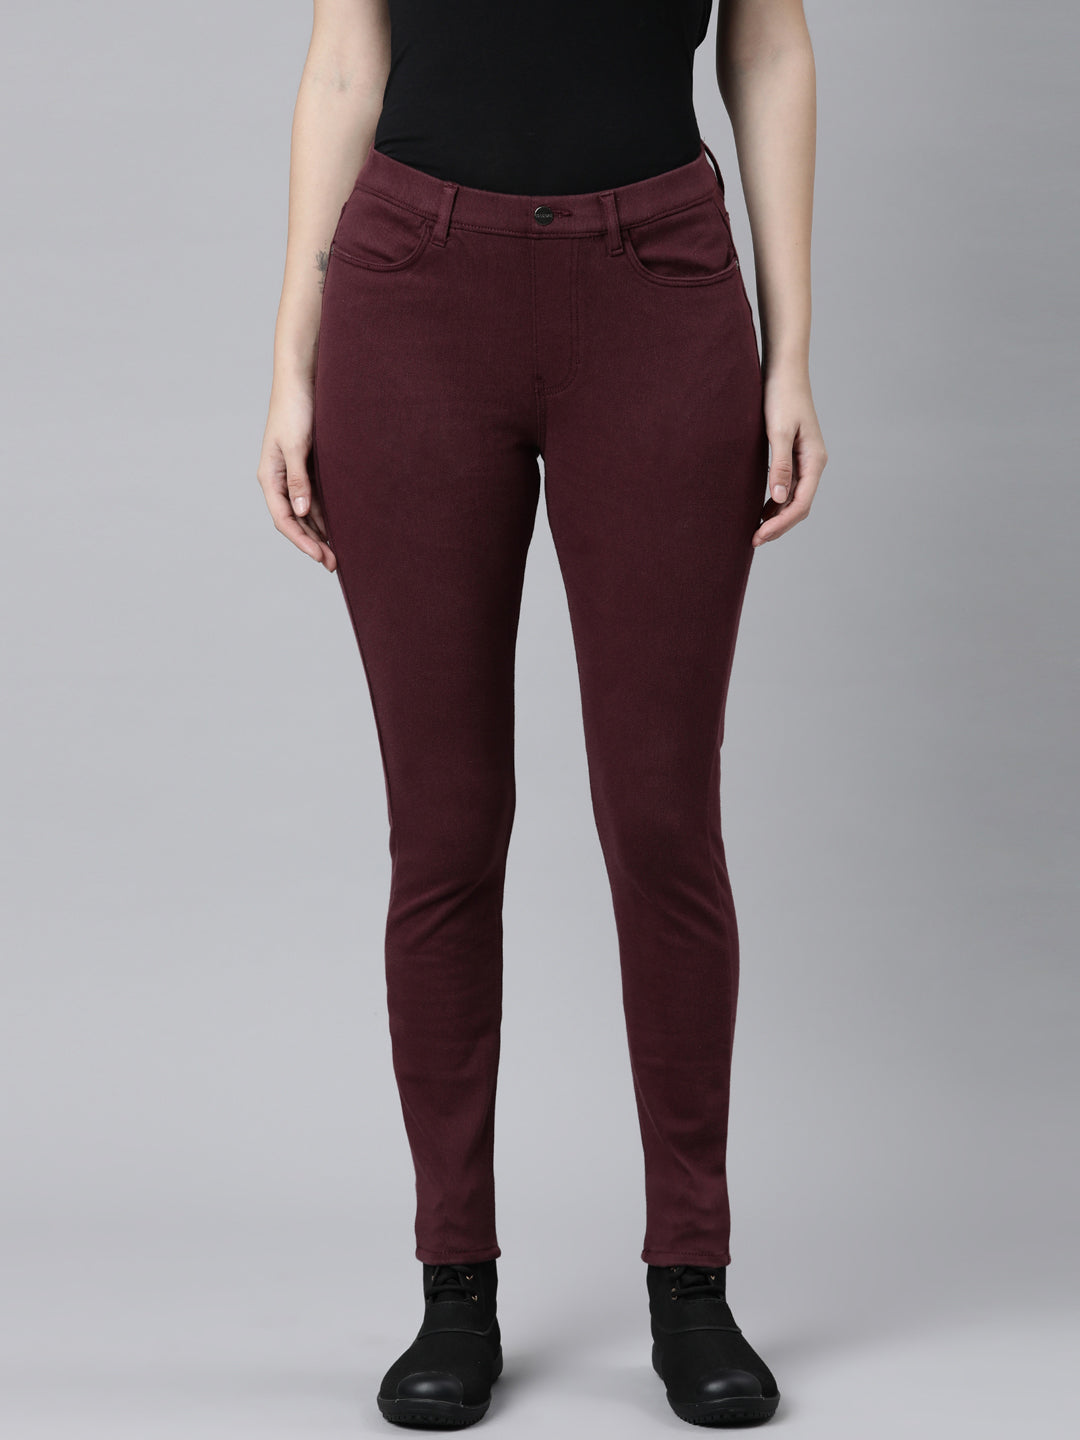 Women's Jeans and Jeggings Collection - Buy Online at GoColors – Page 3